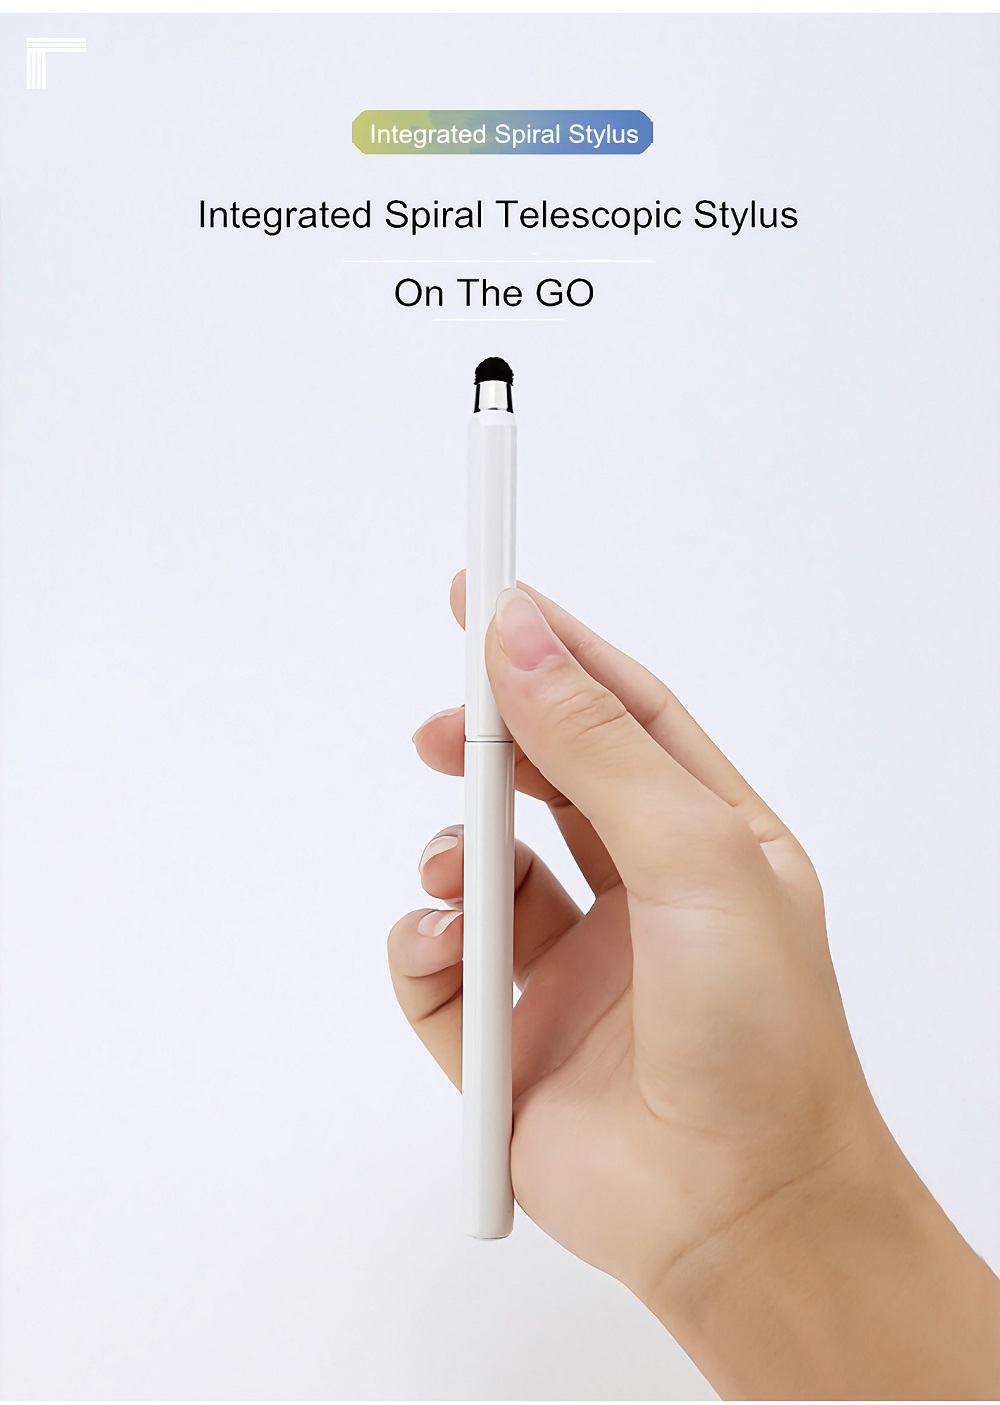 Wenku-WK-1020B-Integrated-Rotary-Capacitor-Stylus-Pen-for-IOS-Android-Tablet-Smartphone-1683831-2